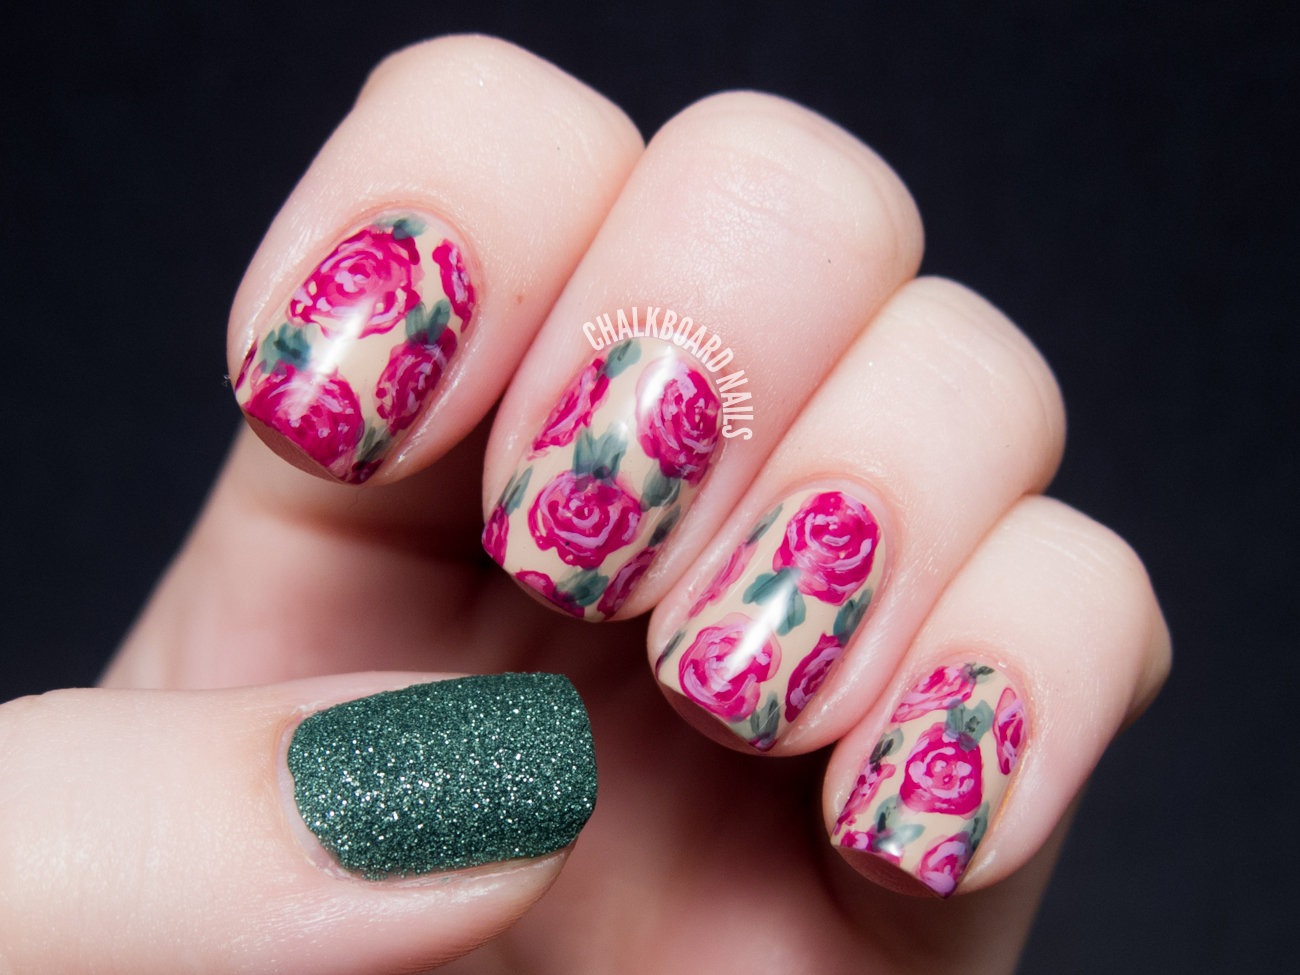 3. "Nail Art with Roses on Pinterest" - wide 9